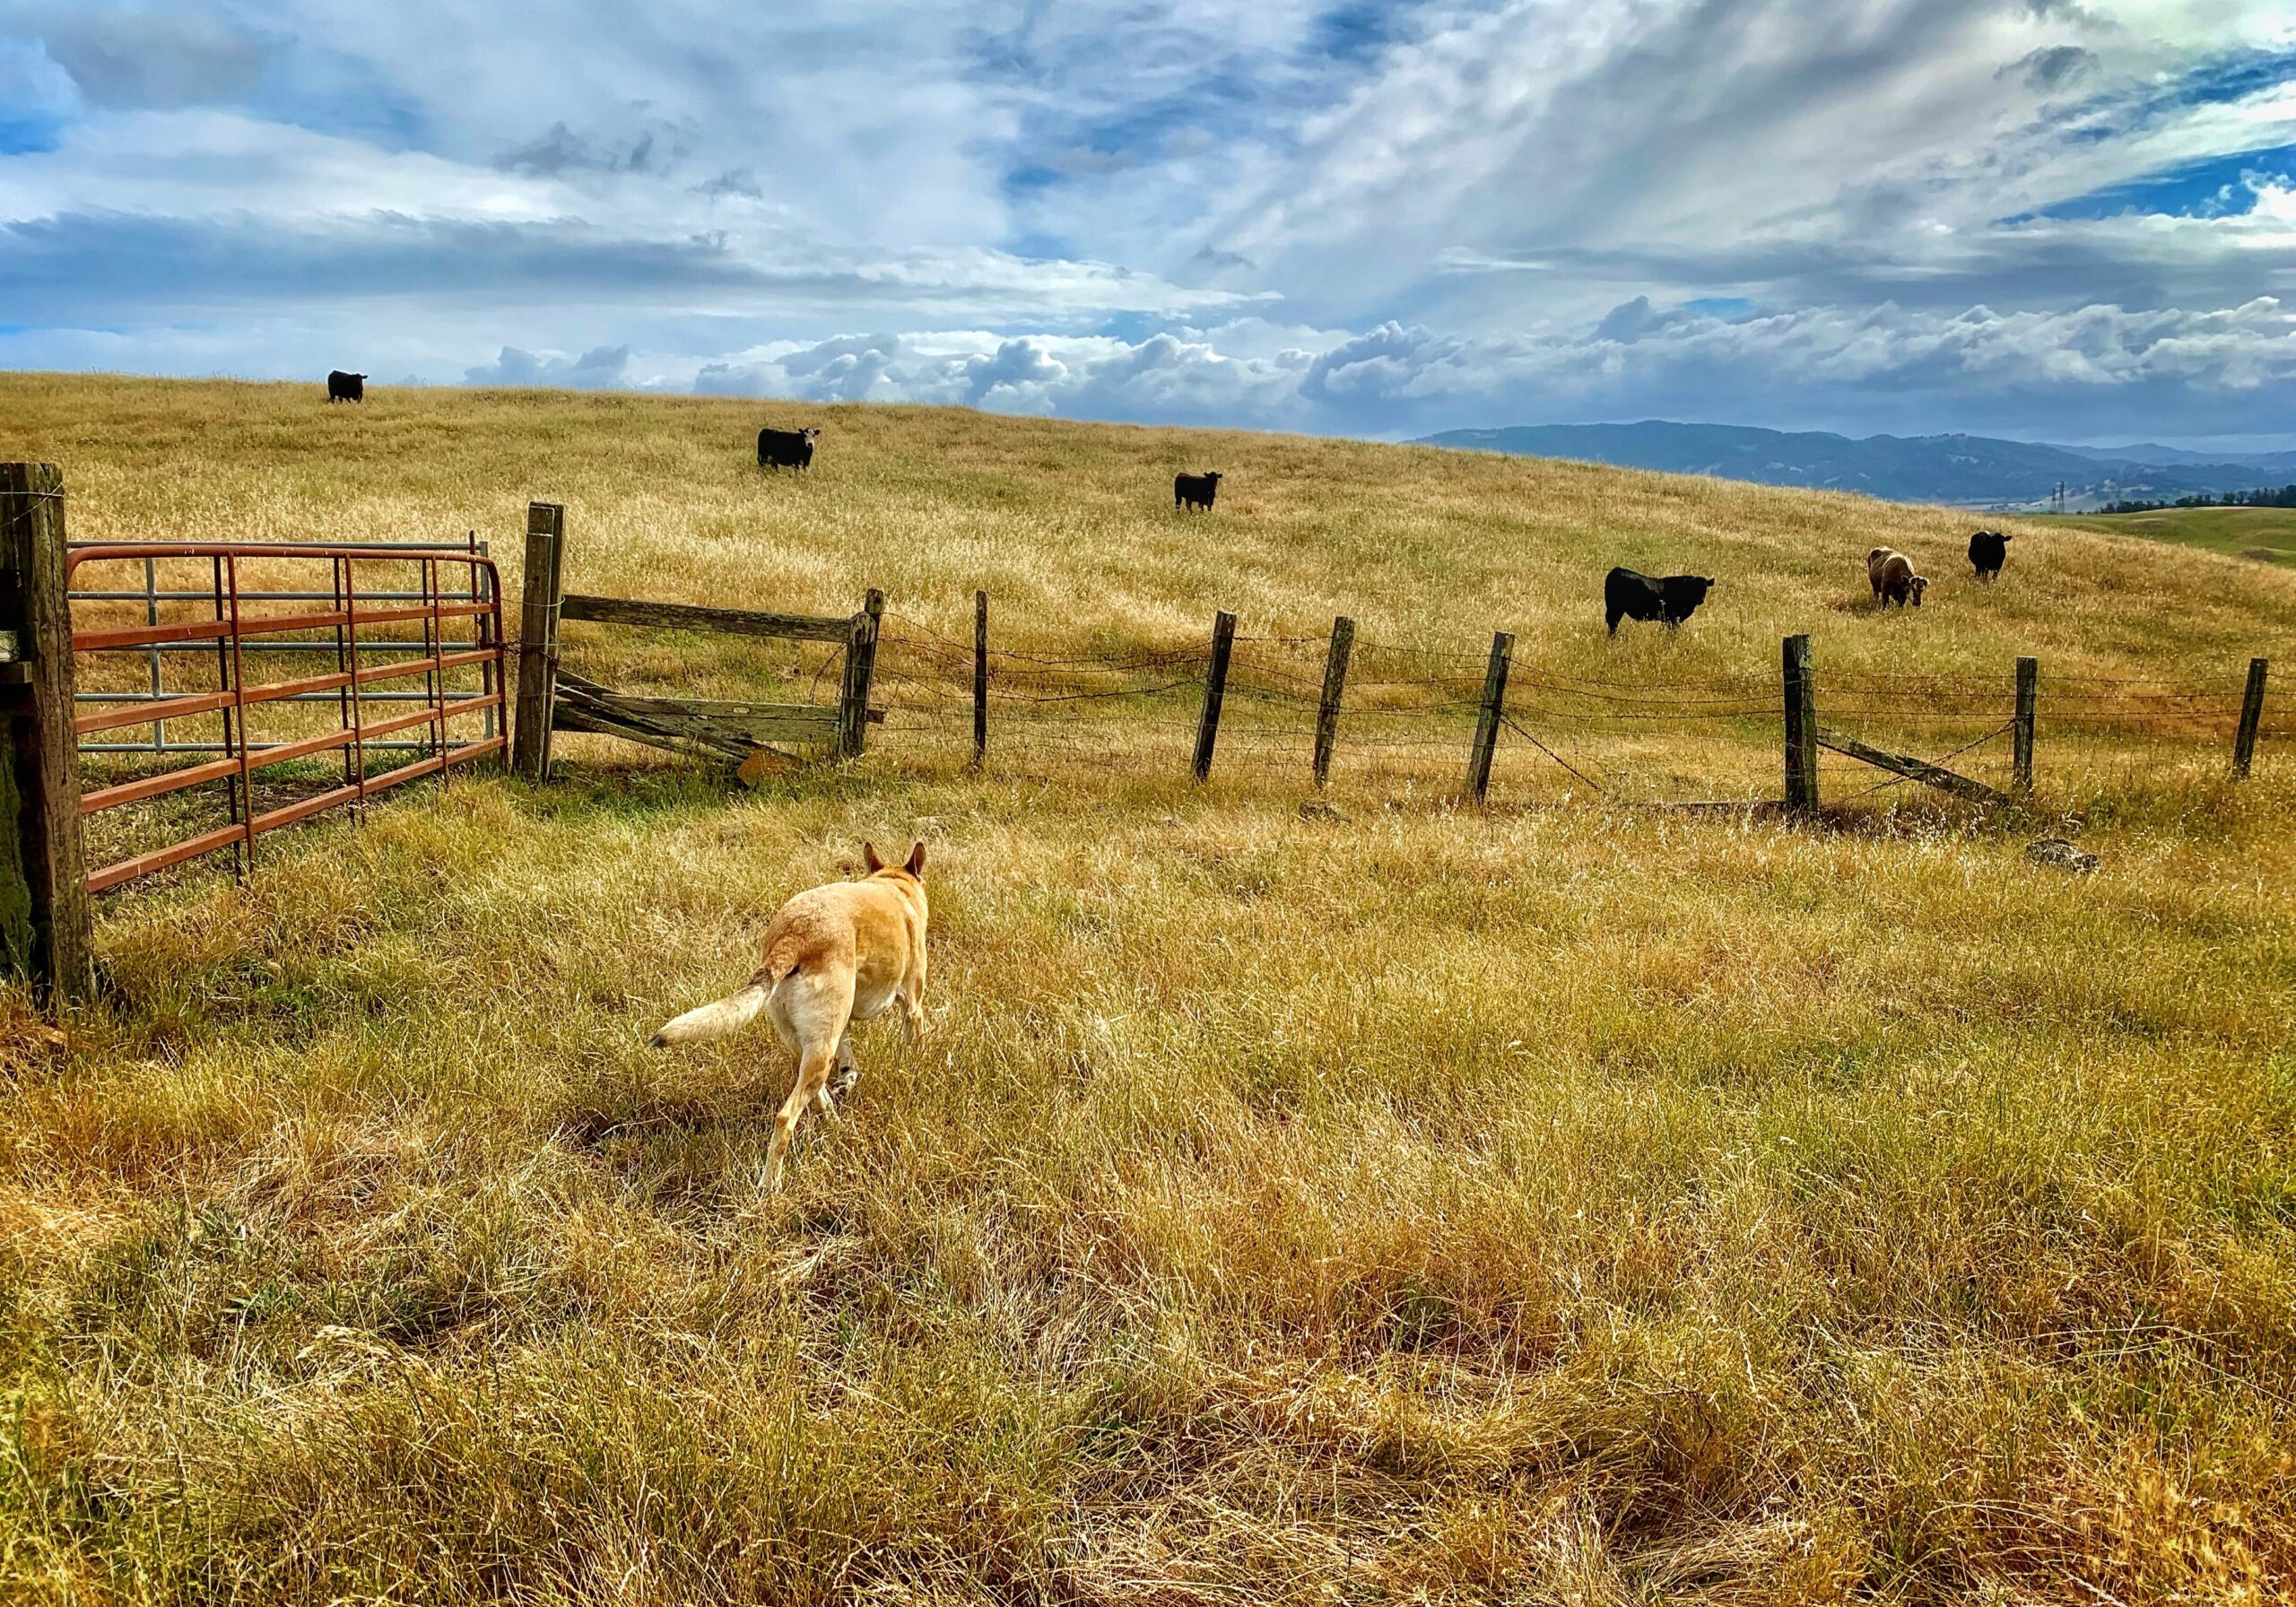 A dog is walking through a field with cows.